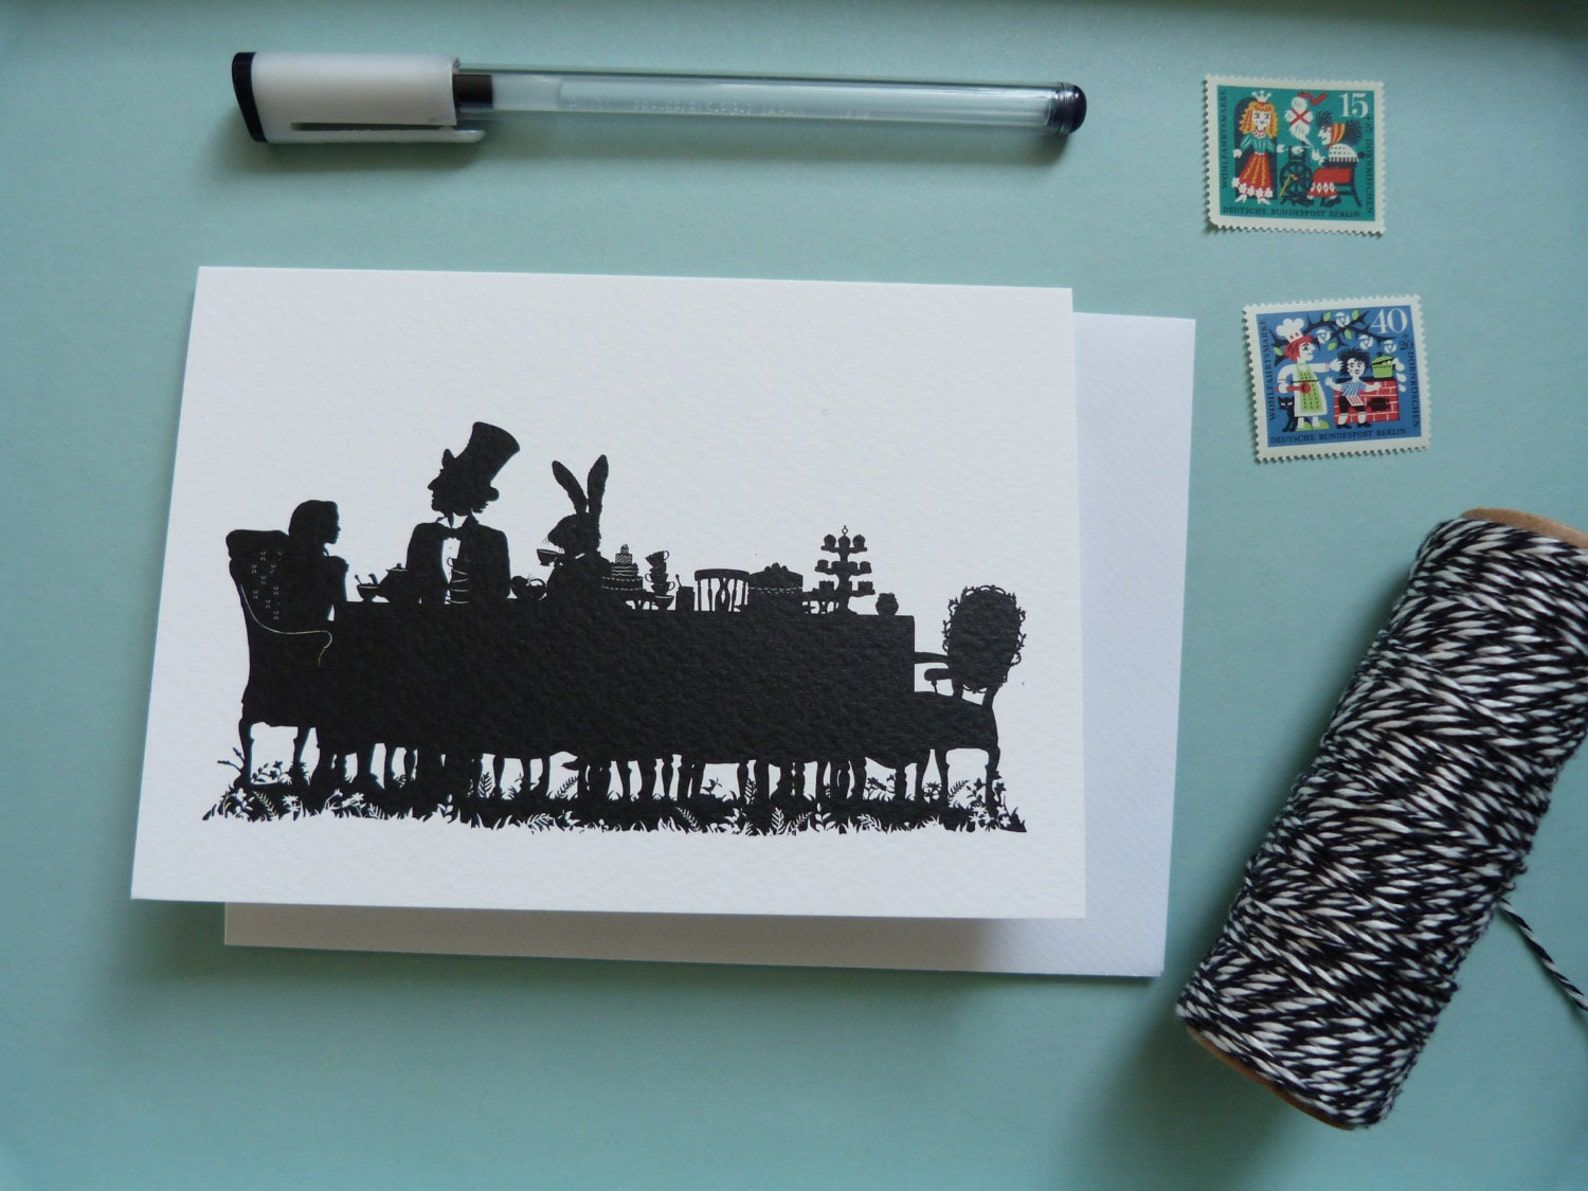 A greeting card with a black silhouette of the characters from Alice in Wonderland at a tea party,